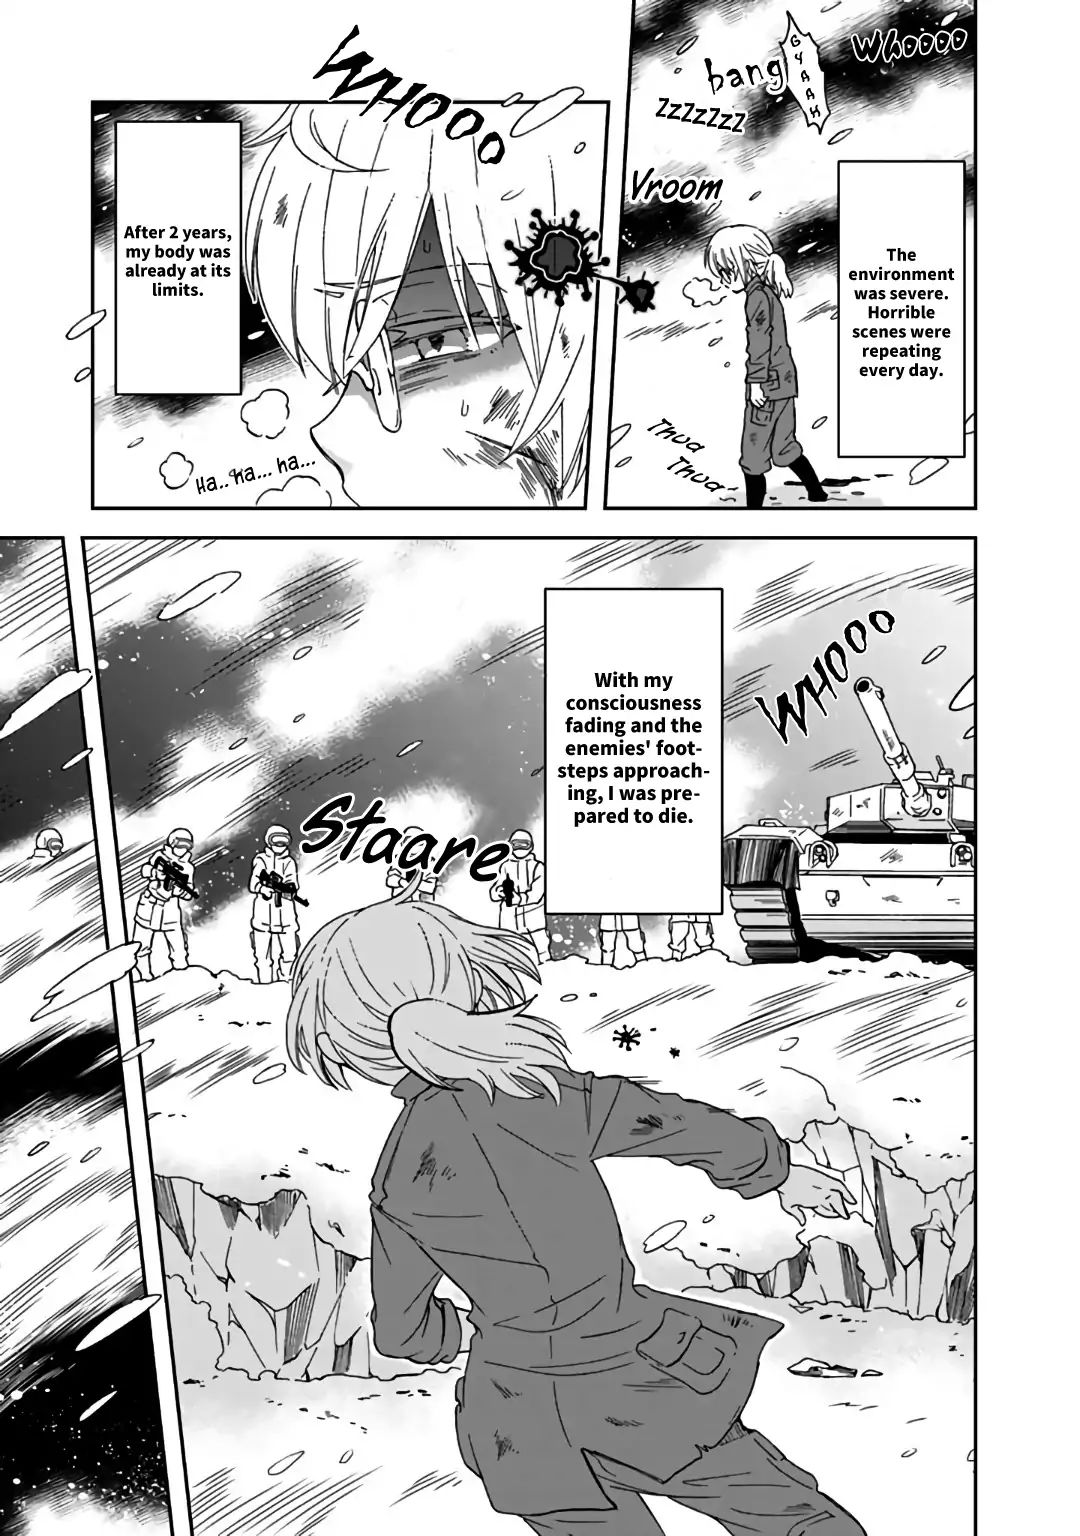 I, Who Possessed A Trash Skill 【Thermal Operator】, Became Unrivaled. Chapter 7 #4